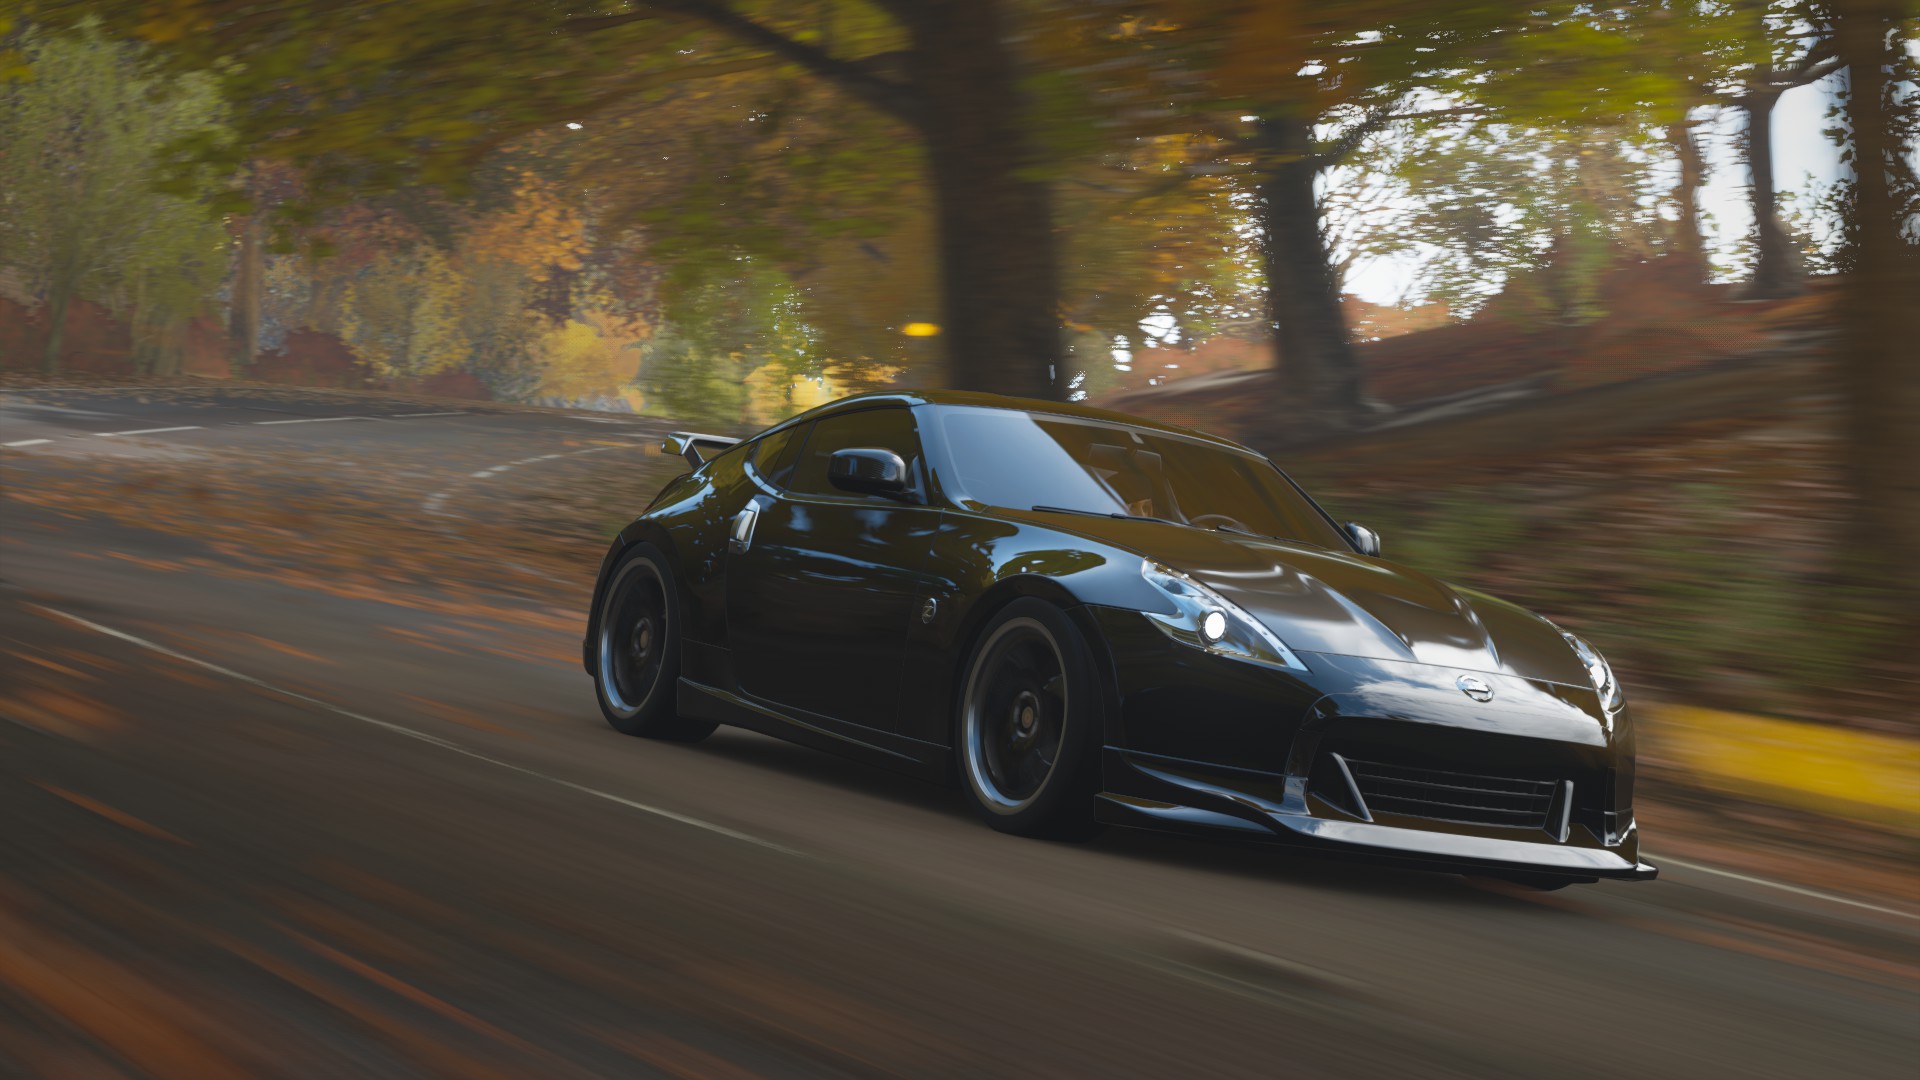 General 1920x1080 Nissan Fairlady Z nature car motion blur CGI digital art Japanese cars blurred blurry background frontal view vehicle trees road